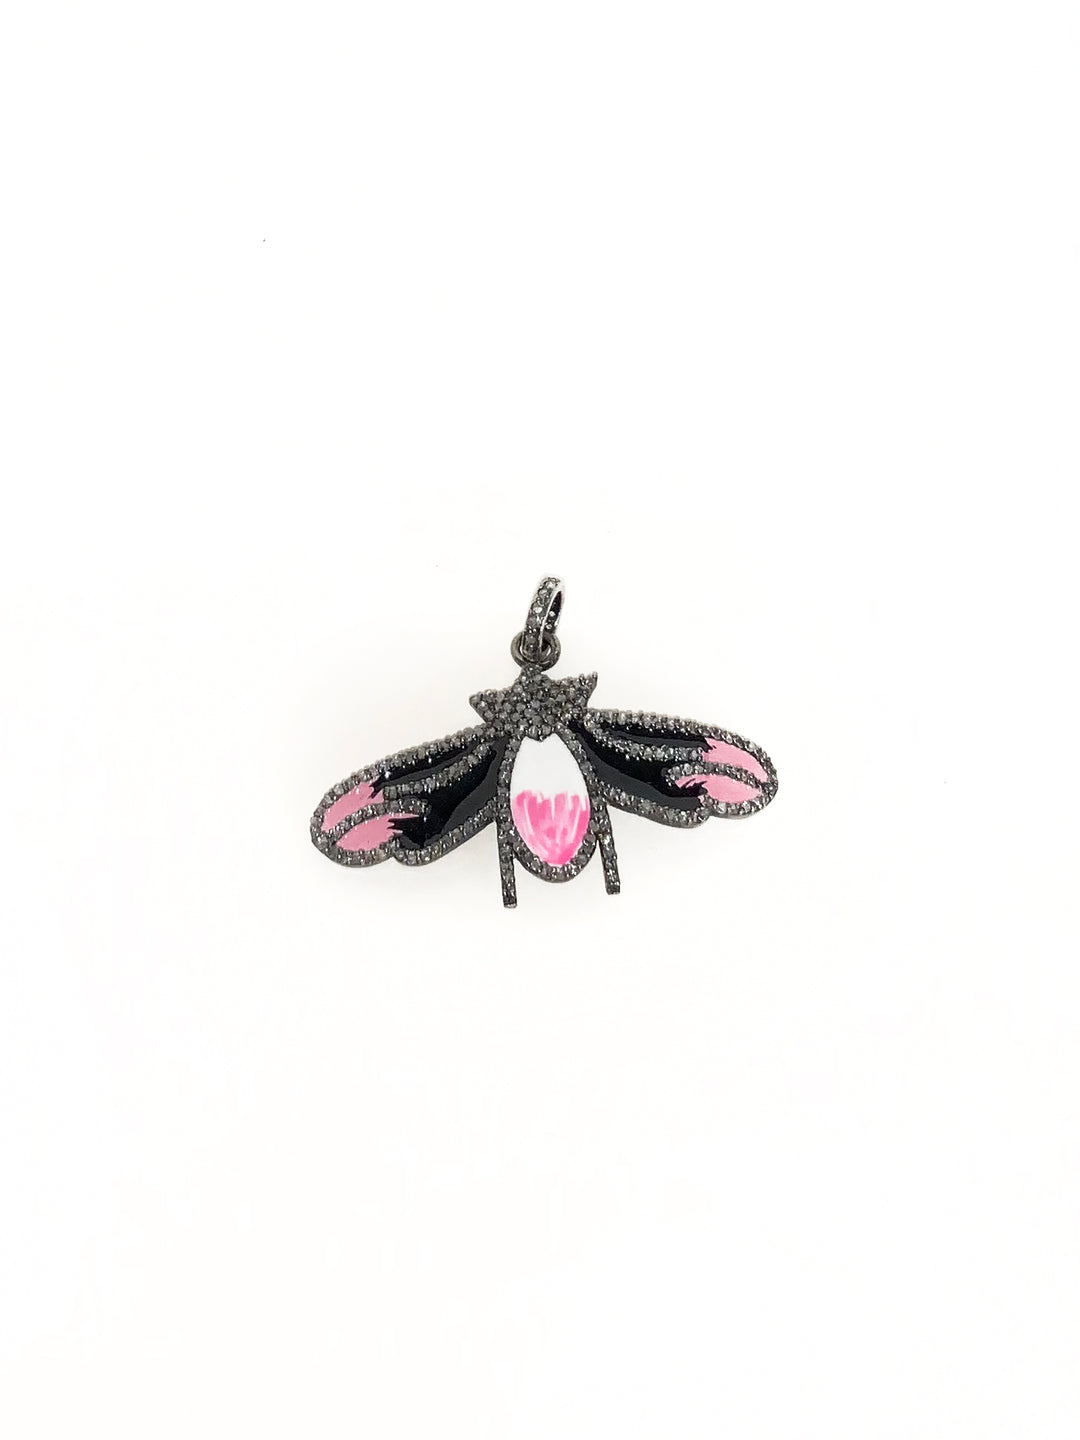 Enamel Insect Pendant - Kingfisher Road - Online Boutique